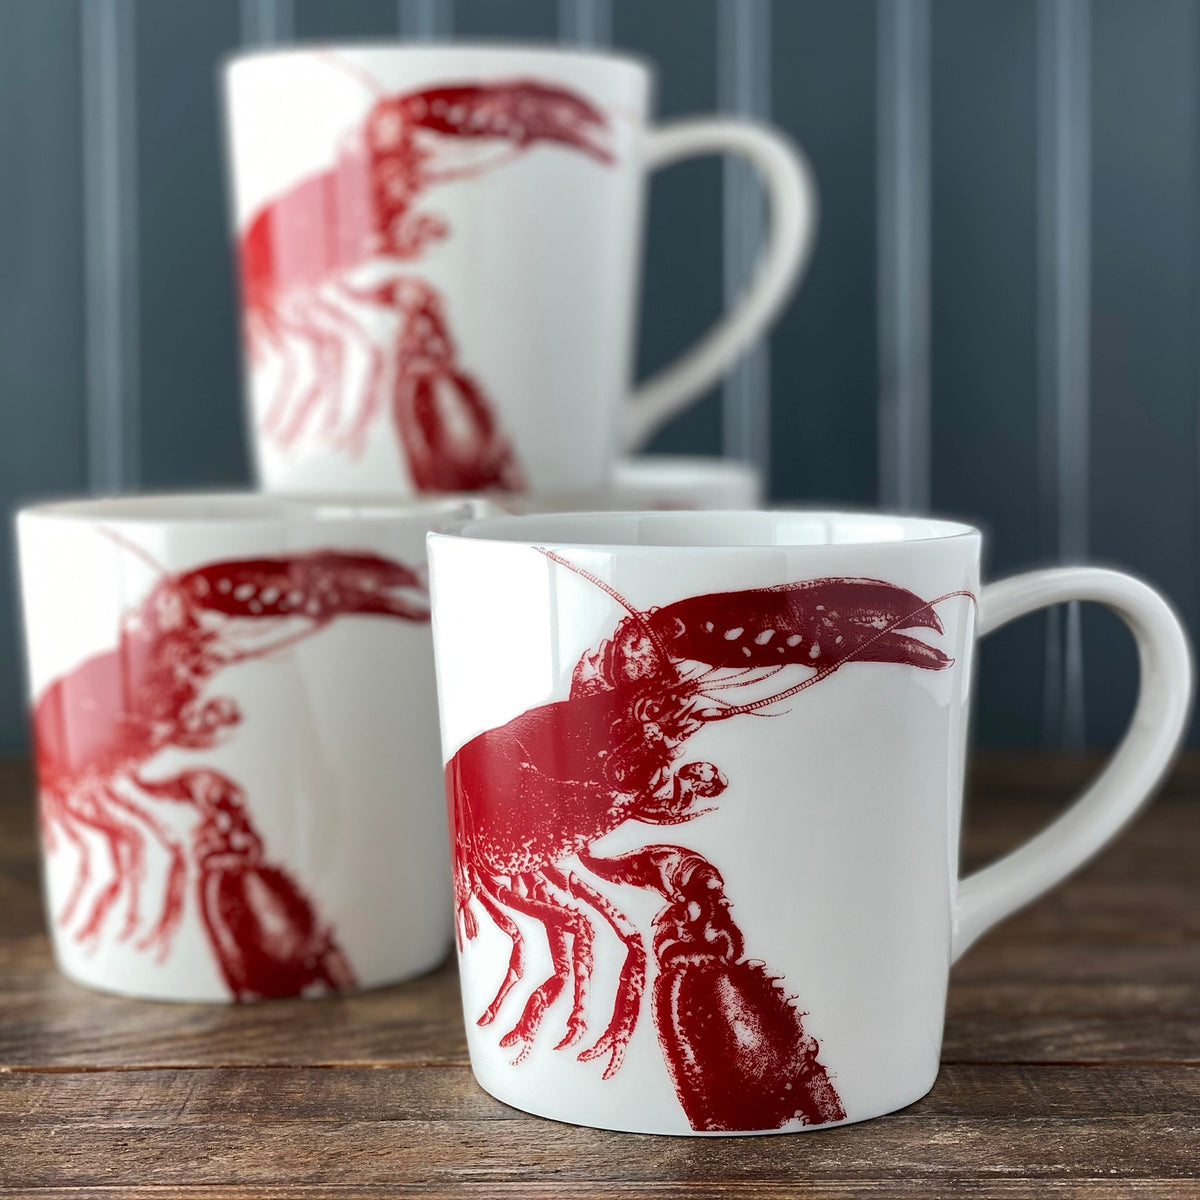 Start your morning with a hot cup of coffee or tea in these exquisite Lobster Mug Red mugs from Caskata Artisanal Home. Each mug features charming red lobster designs, making them the perfect choice for seafood lovers and fans of coastal.